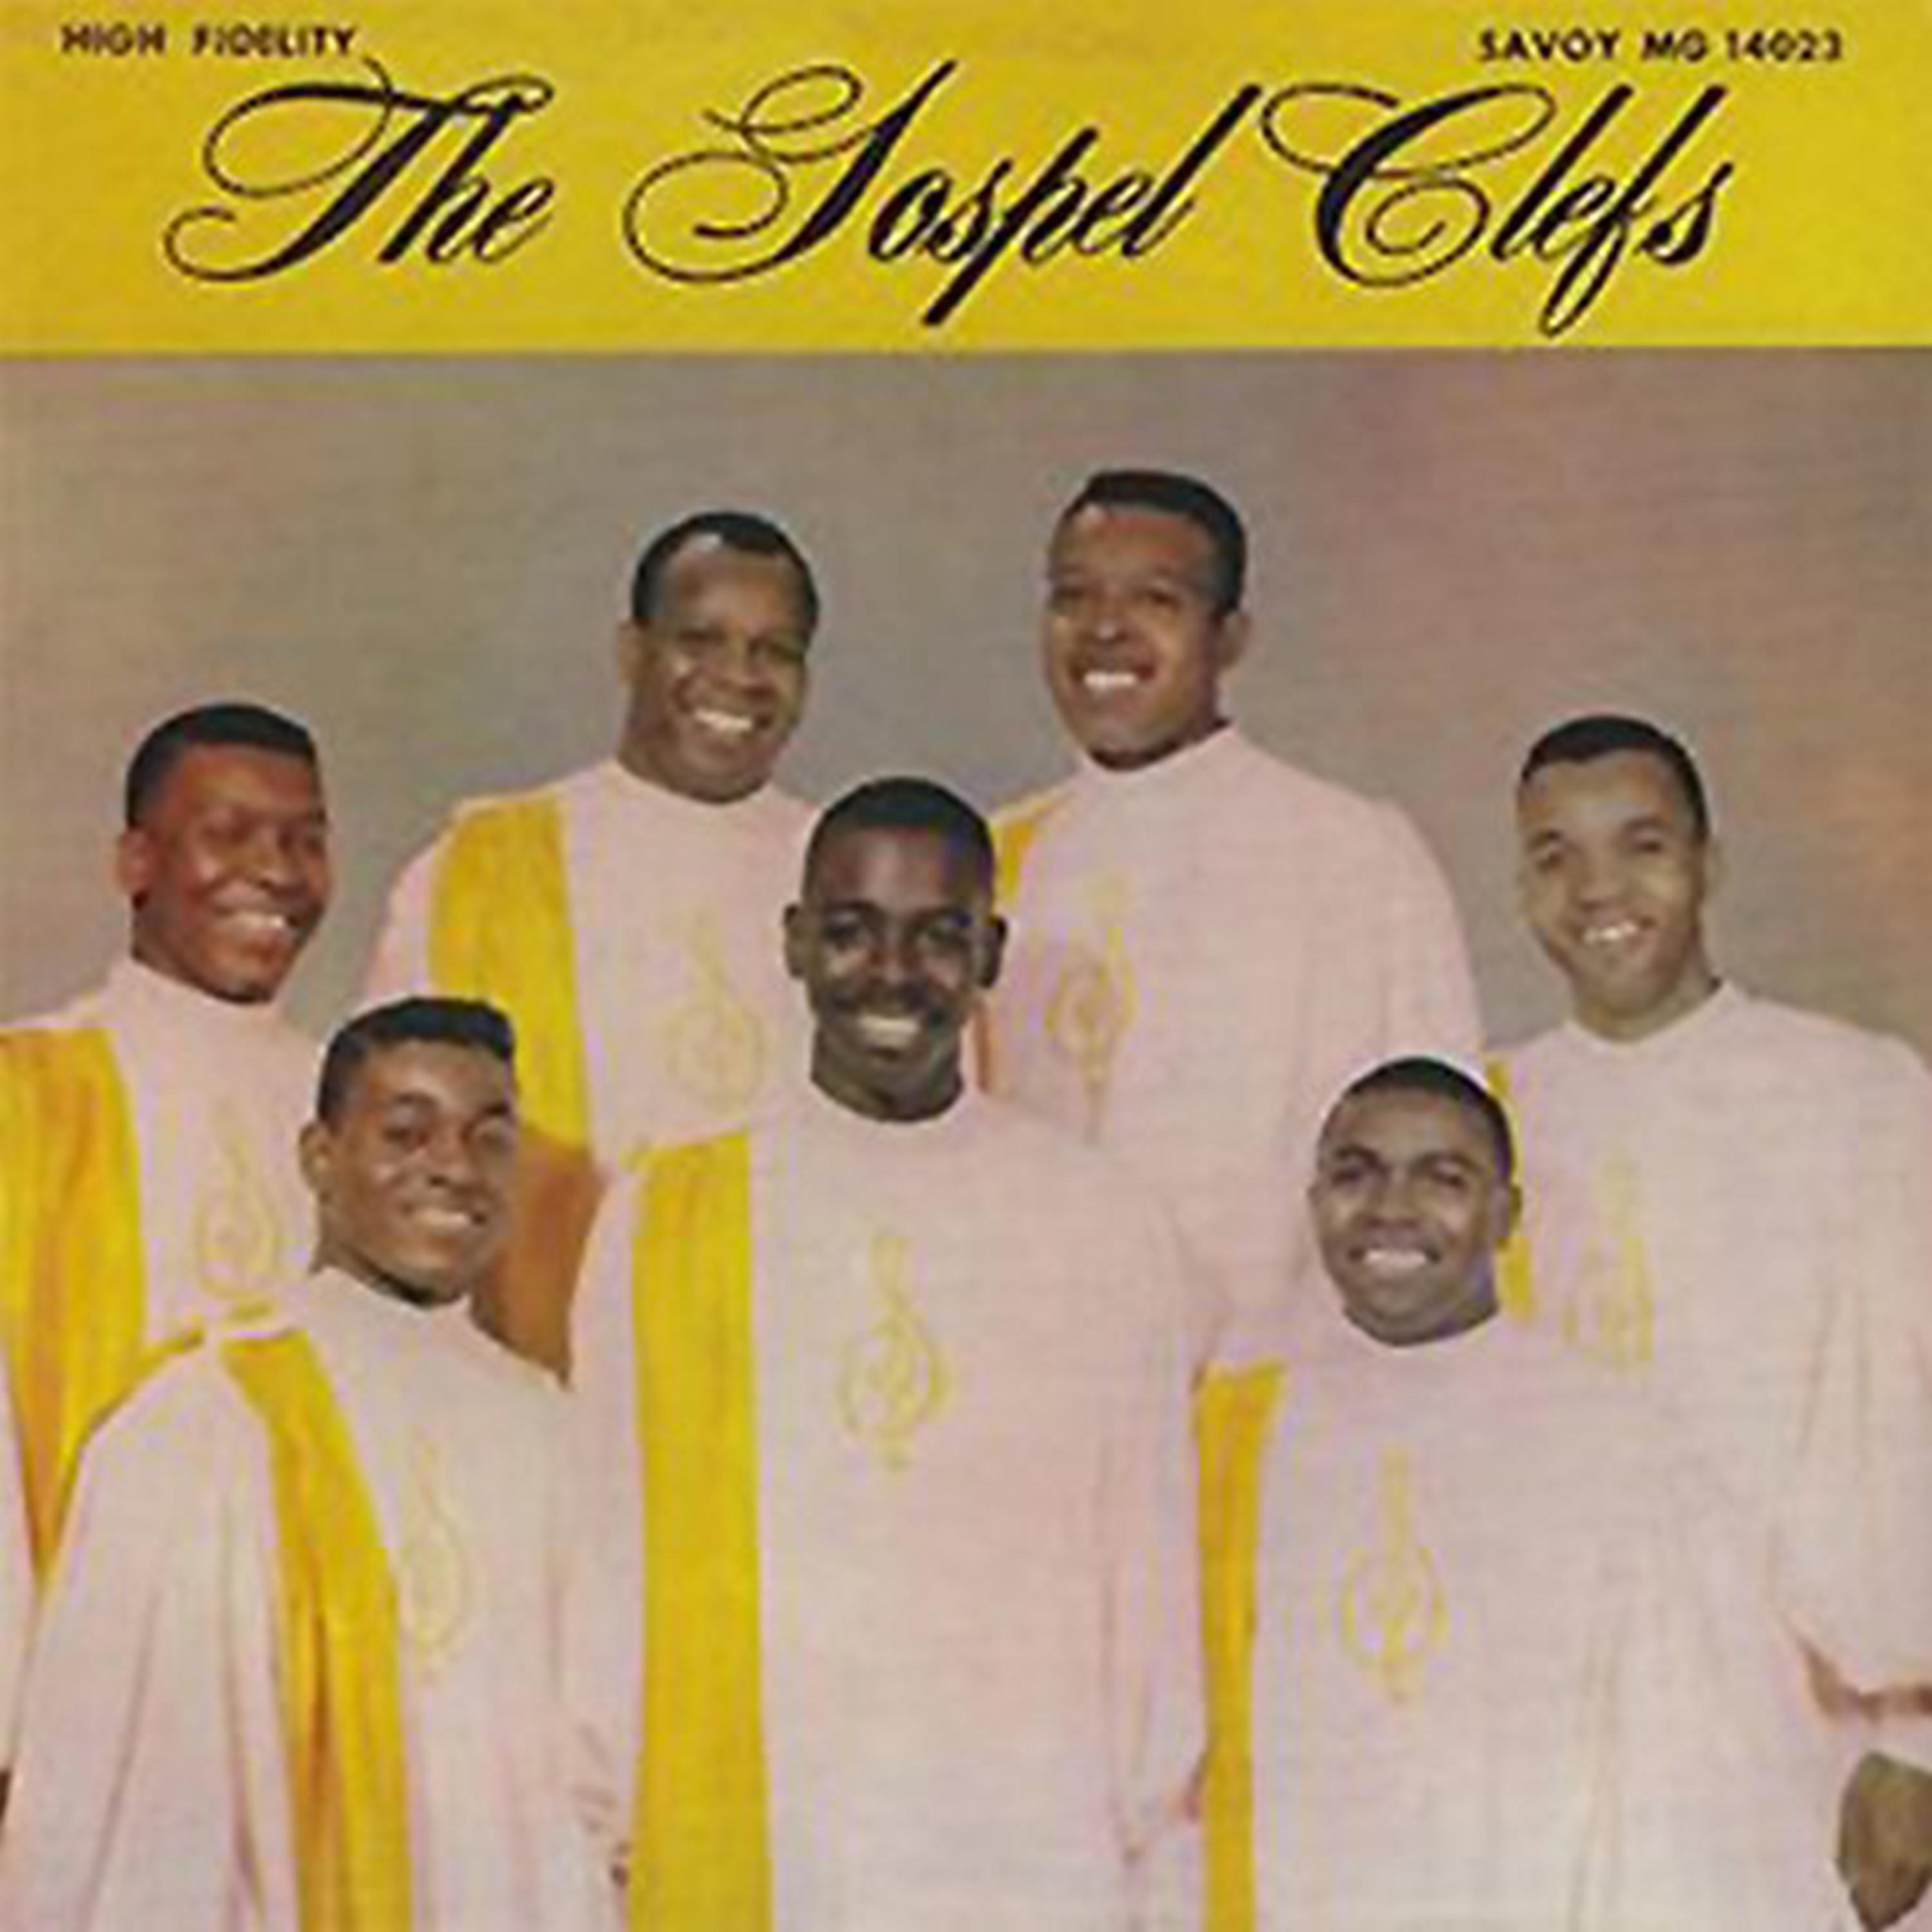 The Gospel Clefs - Wings Of A Dove